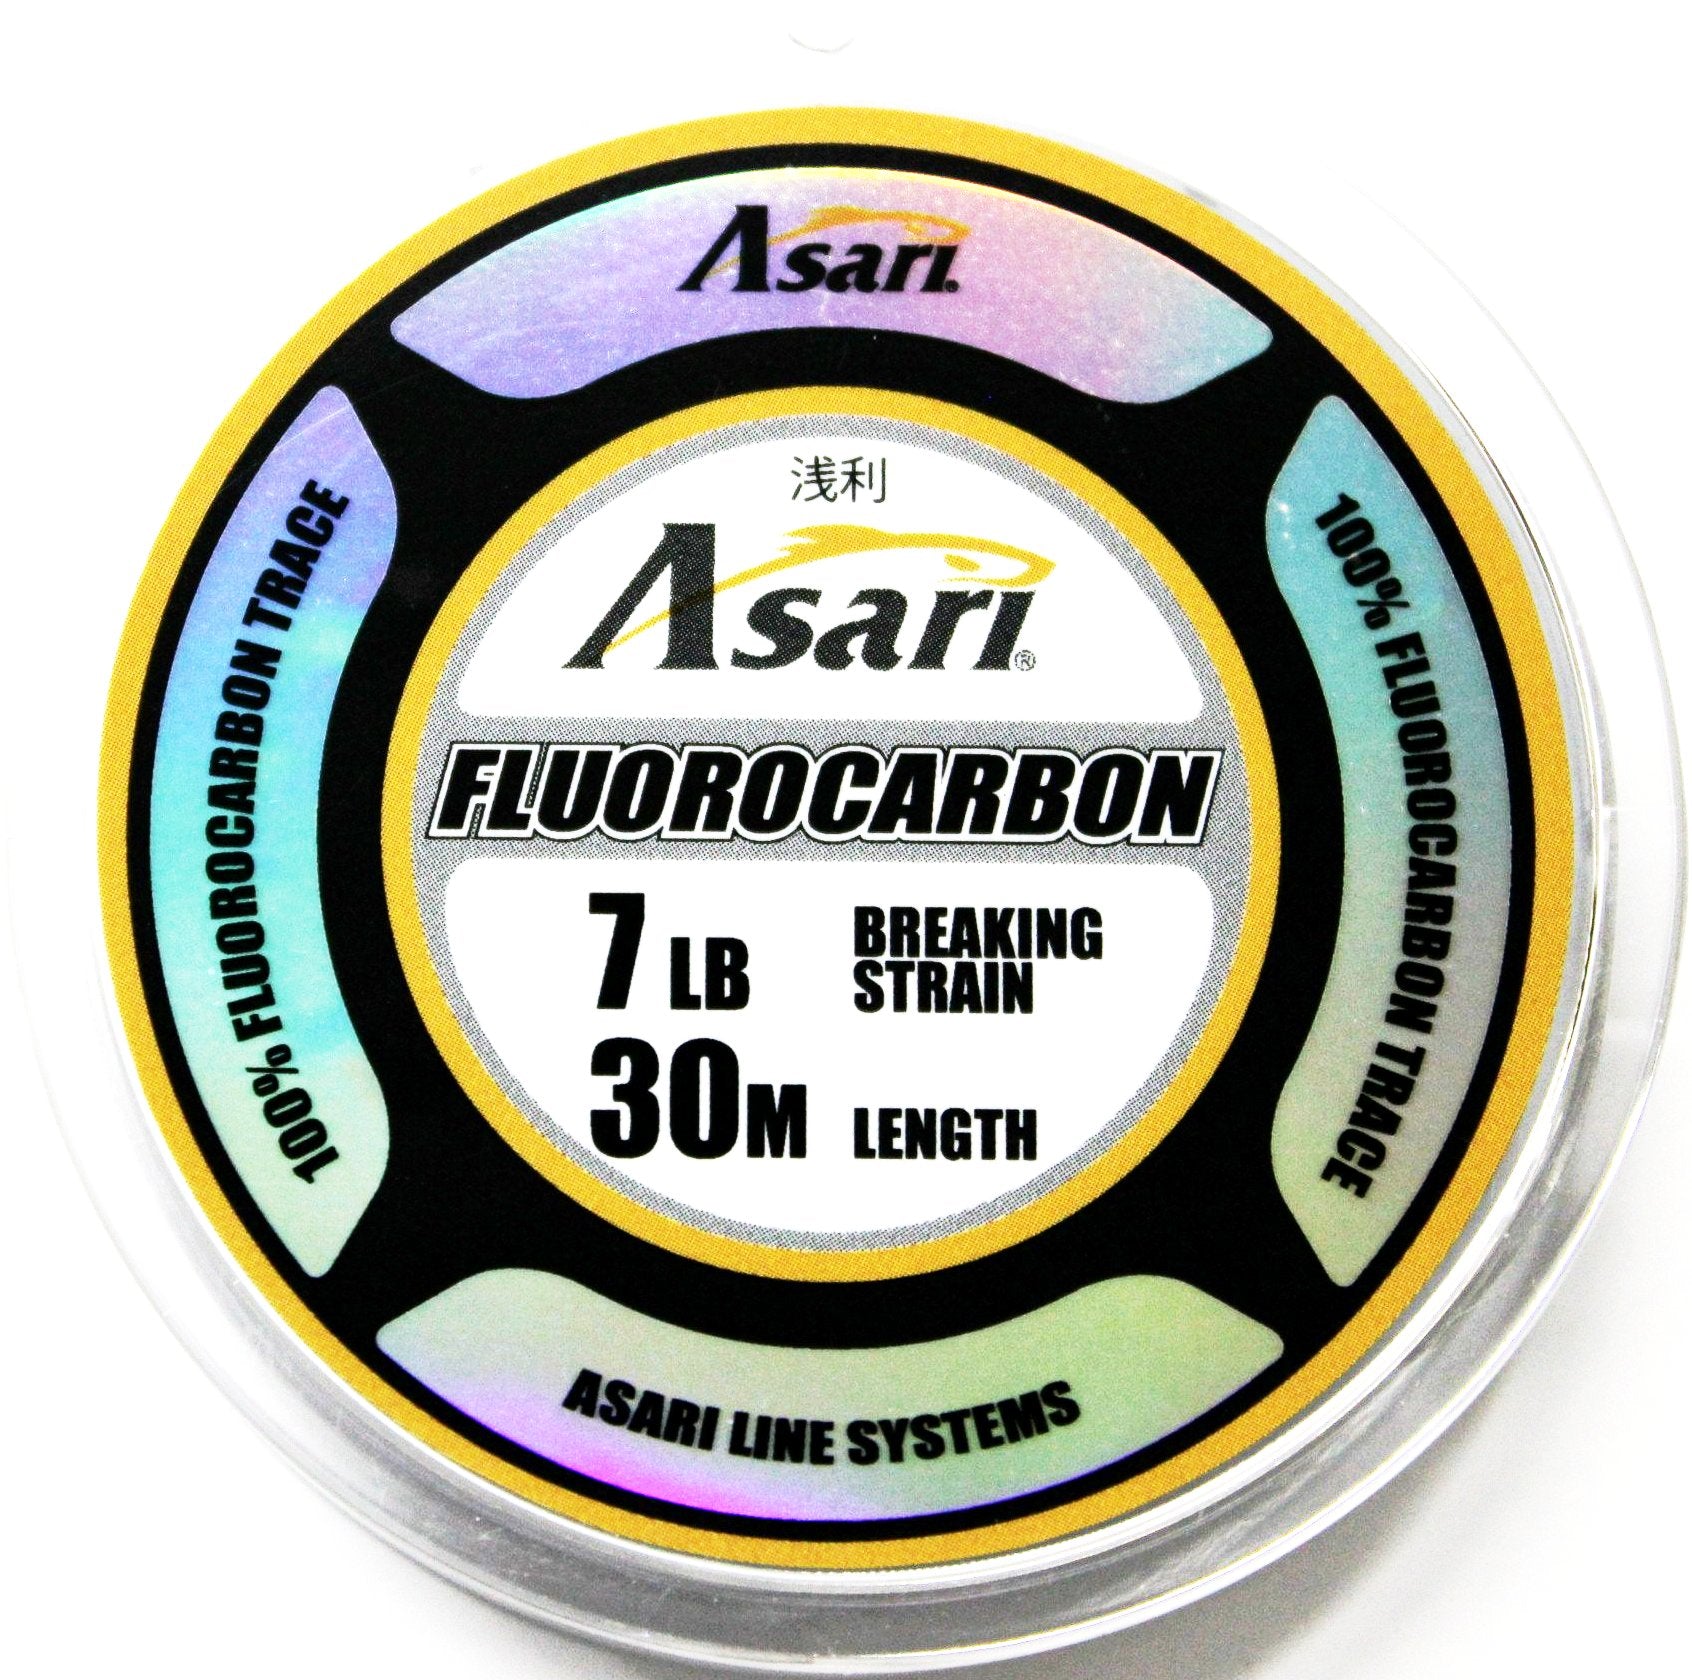 Asari Fluorocarbon Leader Material – Ultimate Fishing and Outdoors